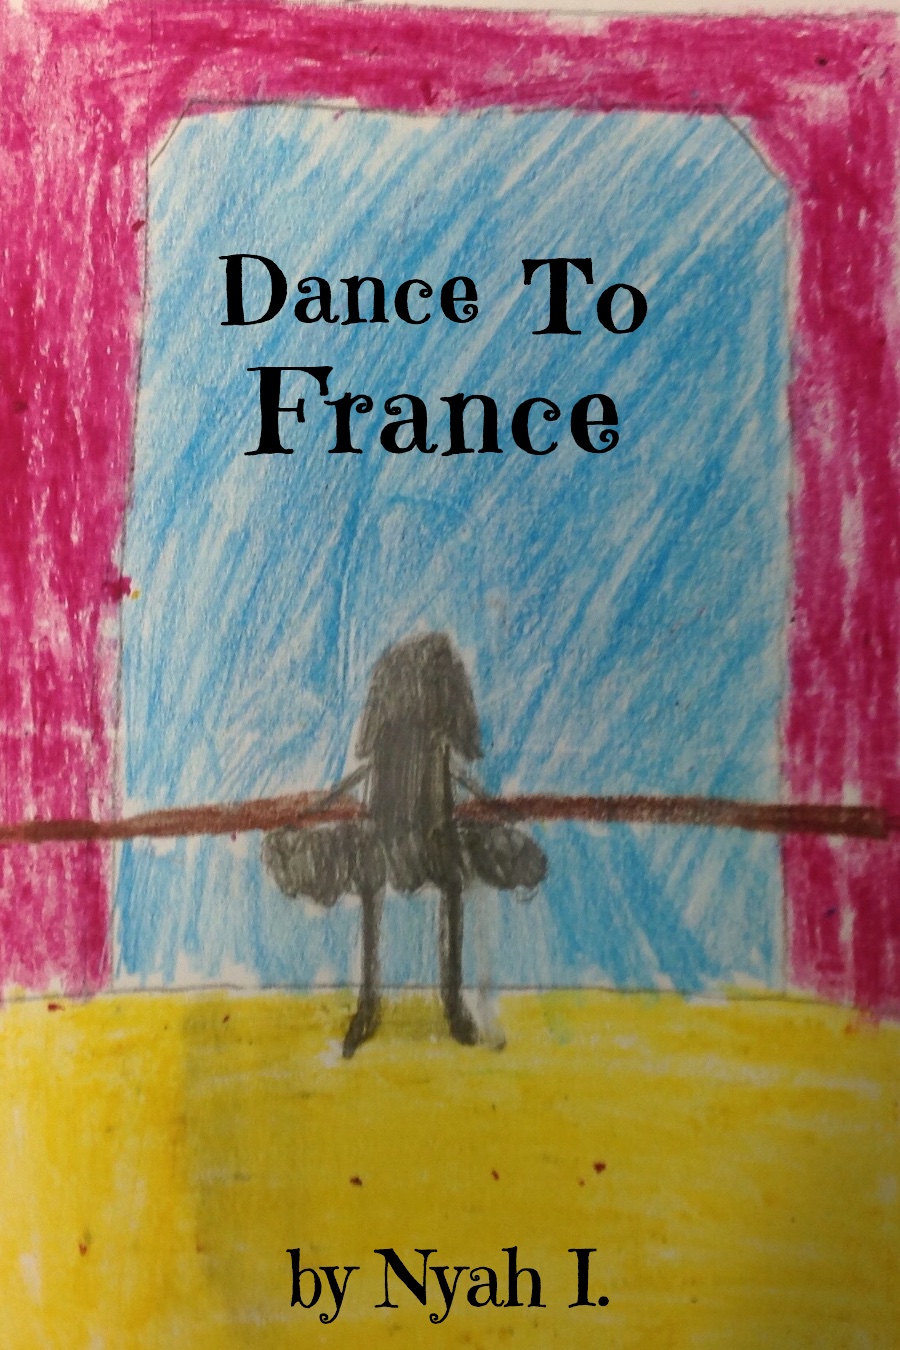 Dance to France by Nyah I